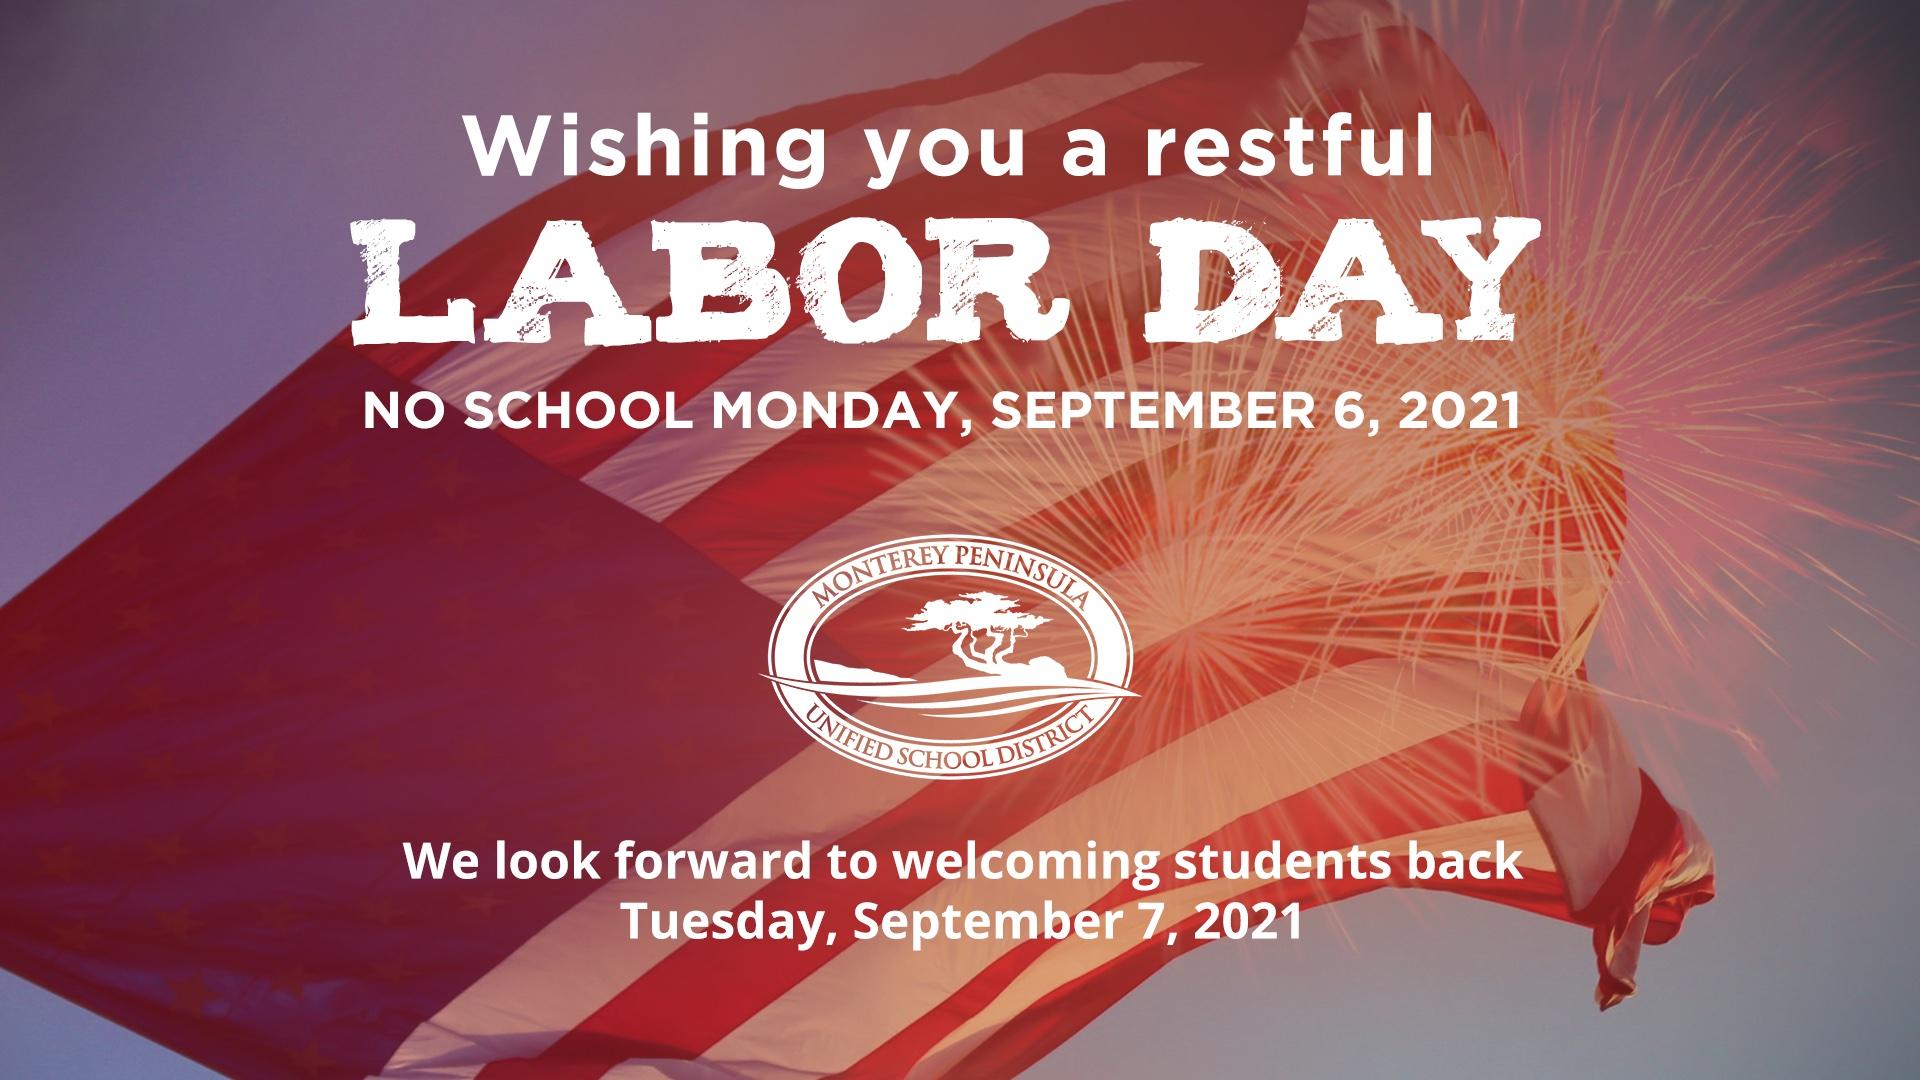 Labor Day in English